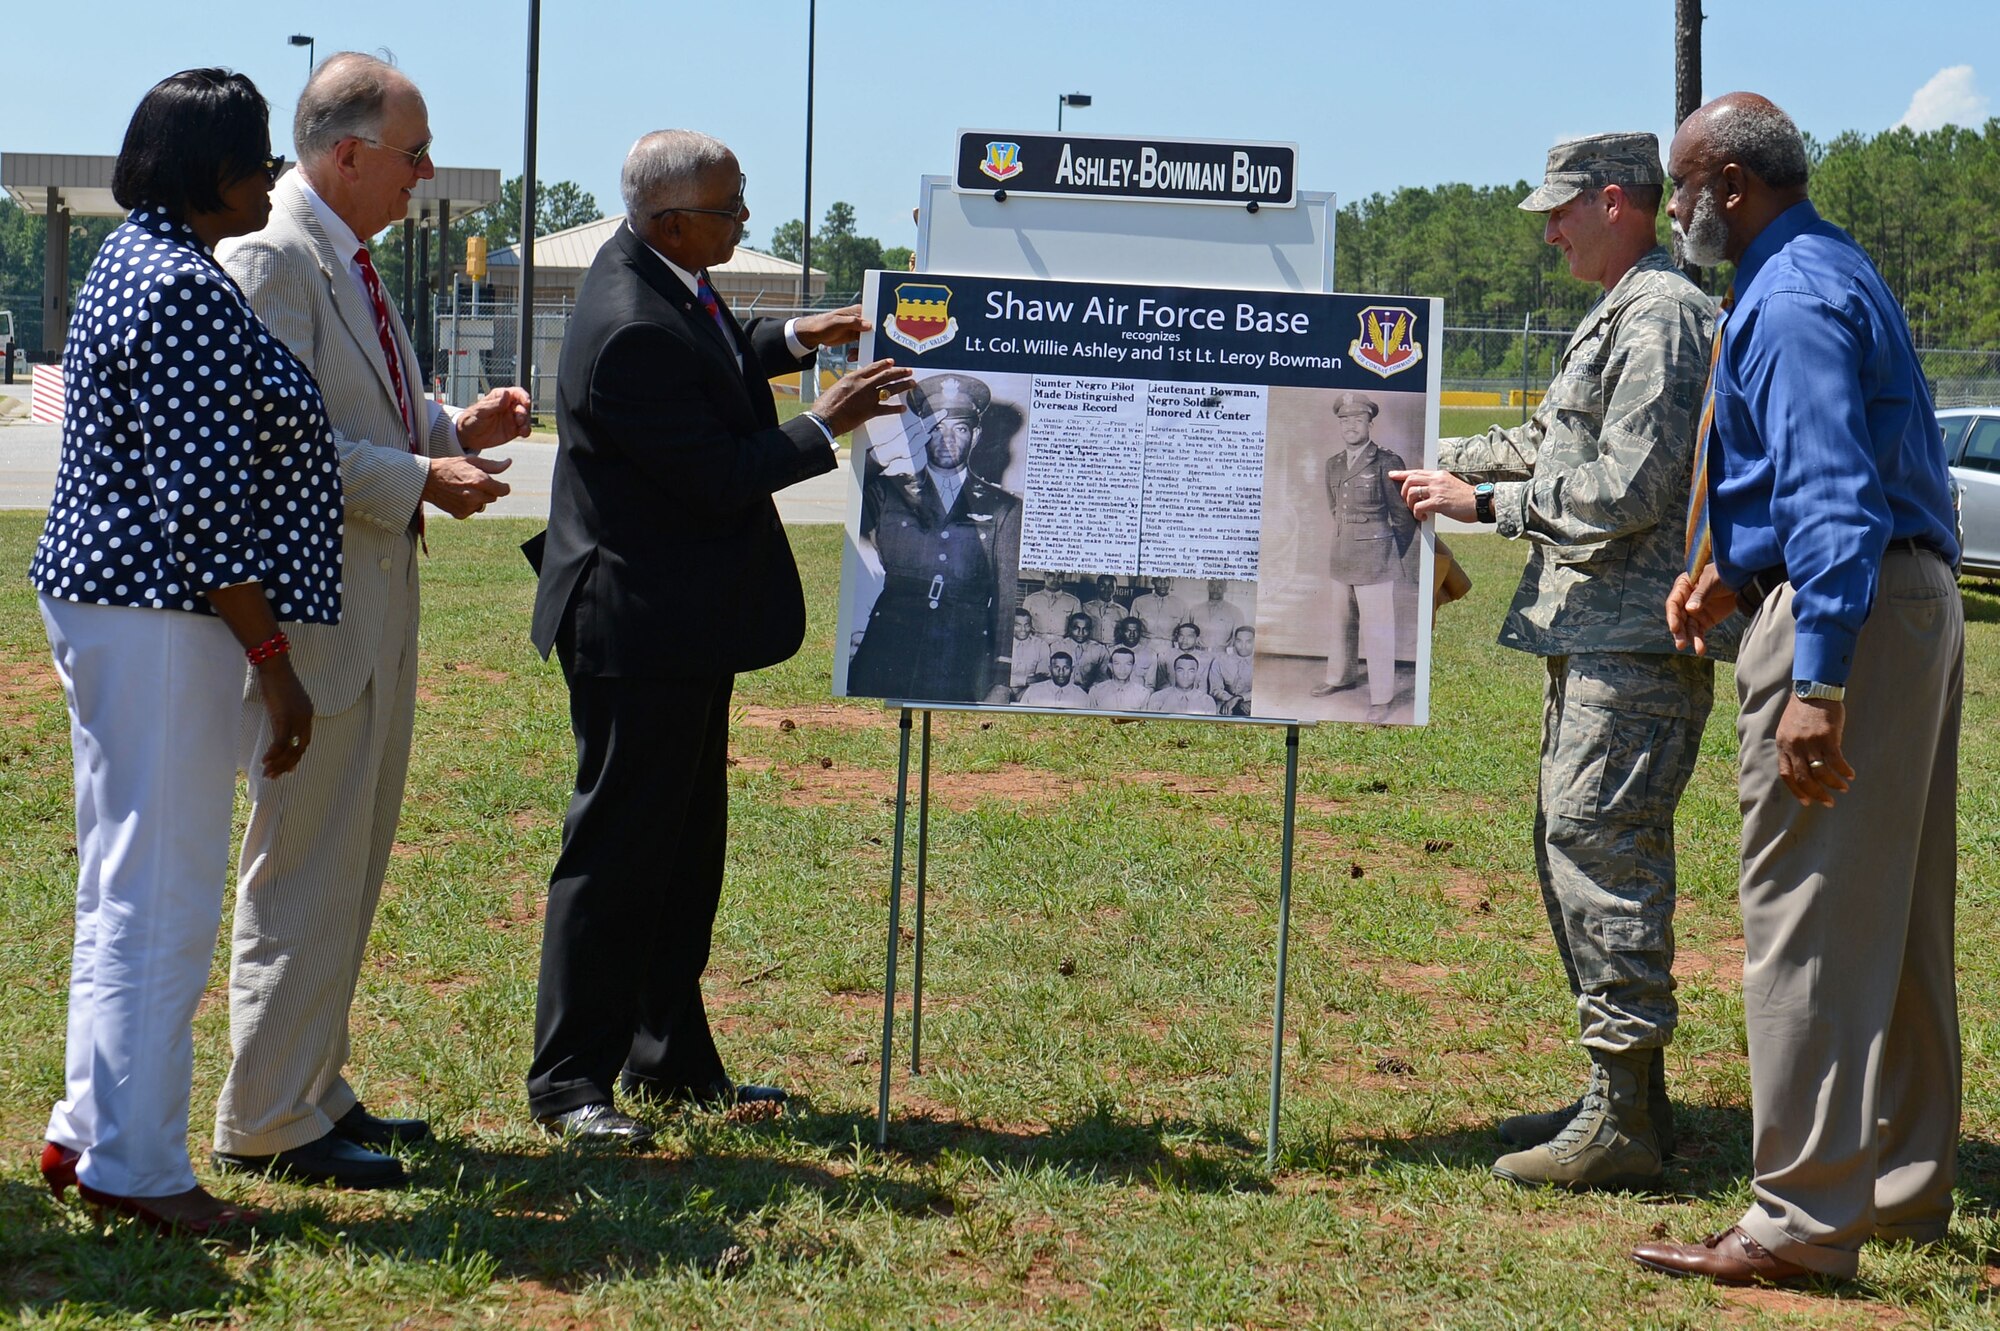 U.S. Air Force Col. Stephen Jost, 20th Fighter Wing commander, and members from the Sumter community unveil the new street name during a street renaming ceremony at Shaw Air Force Base, S.C., July 14, 2016. Throughout the duration of the ceremony, Sumter and Shaw leadership spoke on the history of Lt. Col. Willie Ashley and 1st Lt. Leroy Bowman, and their impact on the future of the Air Force. (U.S. Air Force photo by Airman 1st Class Christopher Maldonado)